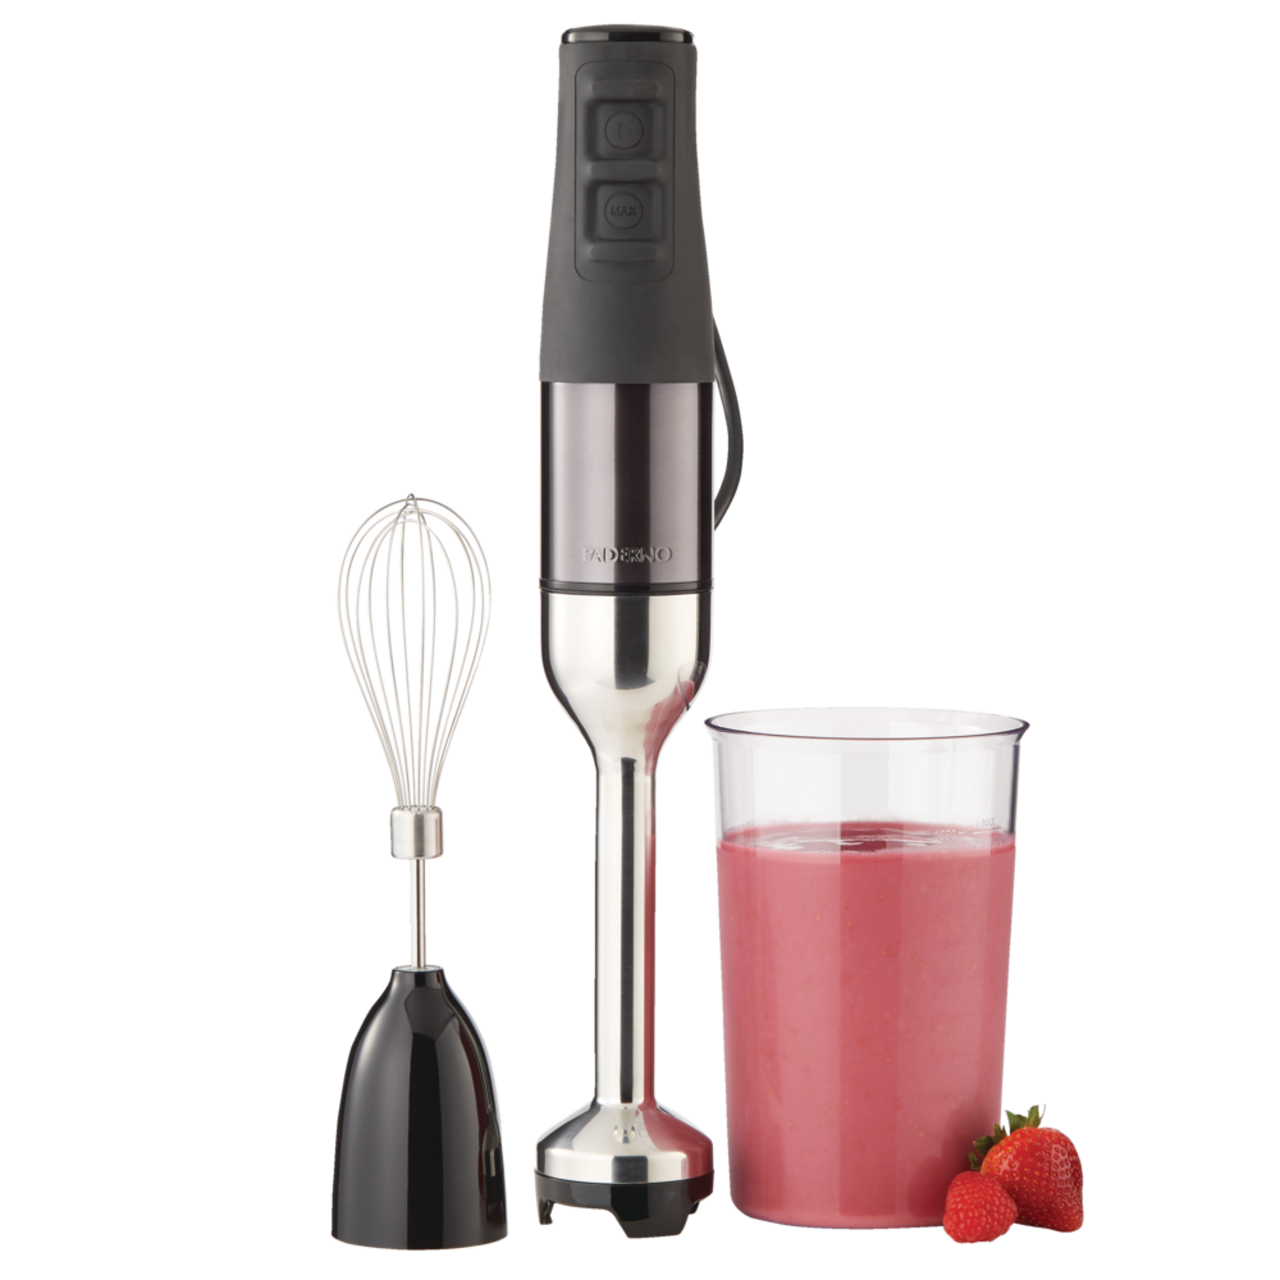 https://media-www.canadiantire.ca/product/living/kitchen/kitchen-appliances/0435256/paderno-2-speed-immersion-blender-black-stainless-steel-b1dfd3ea-f068-402a-903d-3e679bdab807.png?imdensity=1&imwidth=640&impolicy=mZoom